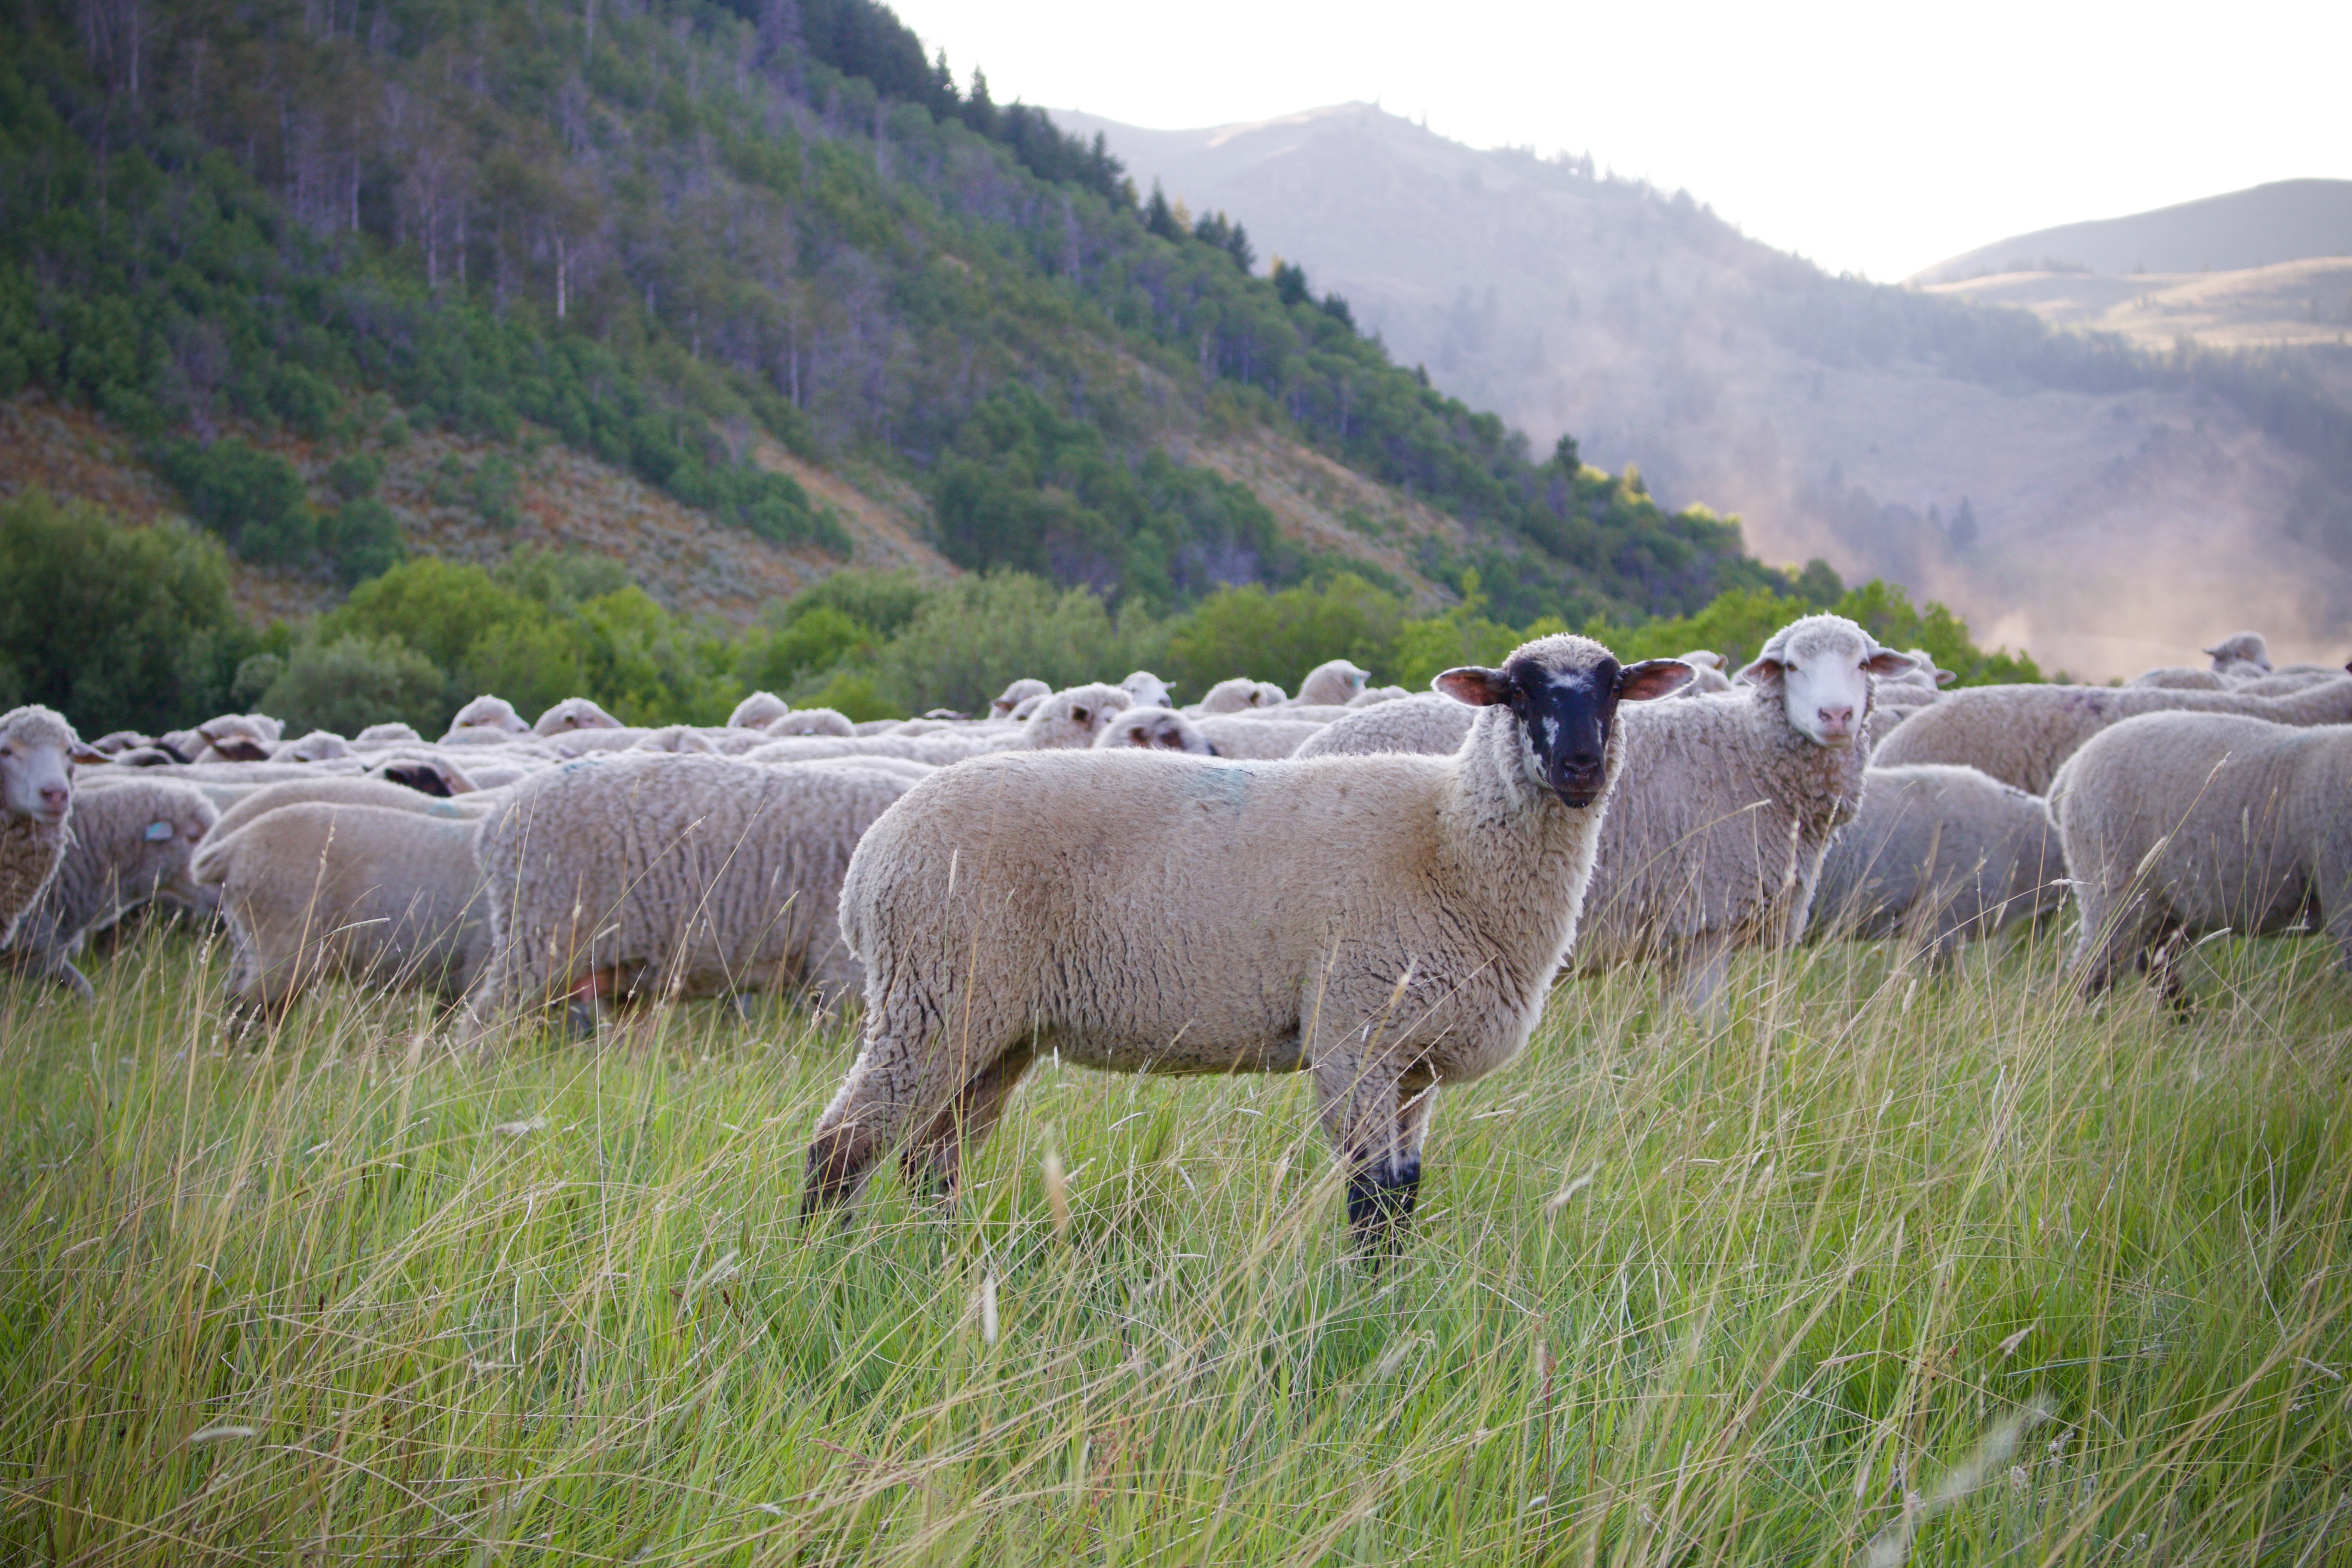 All of Idahound's sheep, beef and rabbit come from ranches in Southern Idaho. One of our partners, Lava Lake Lamb, raises their flocks just 8 miles away!